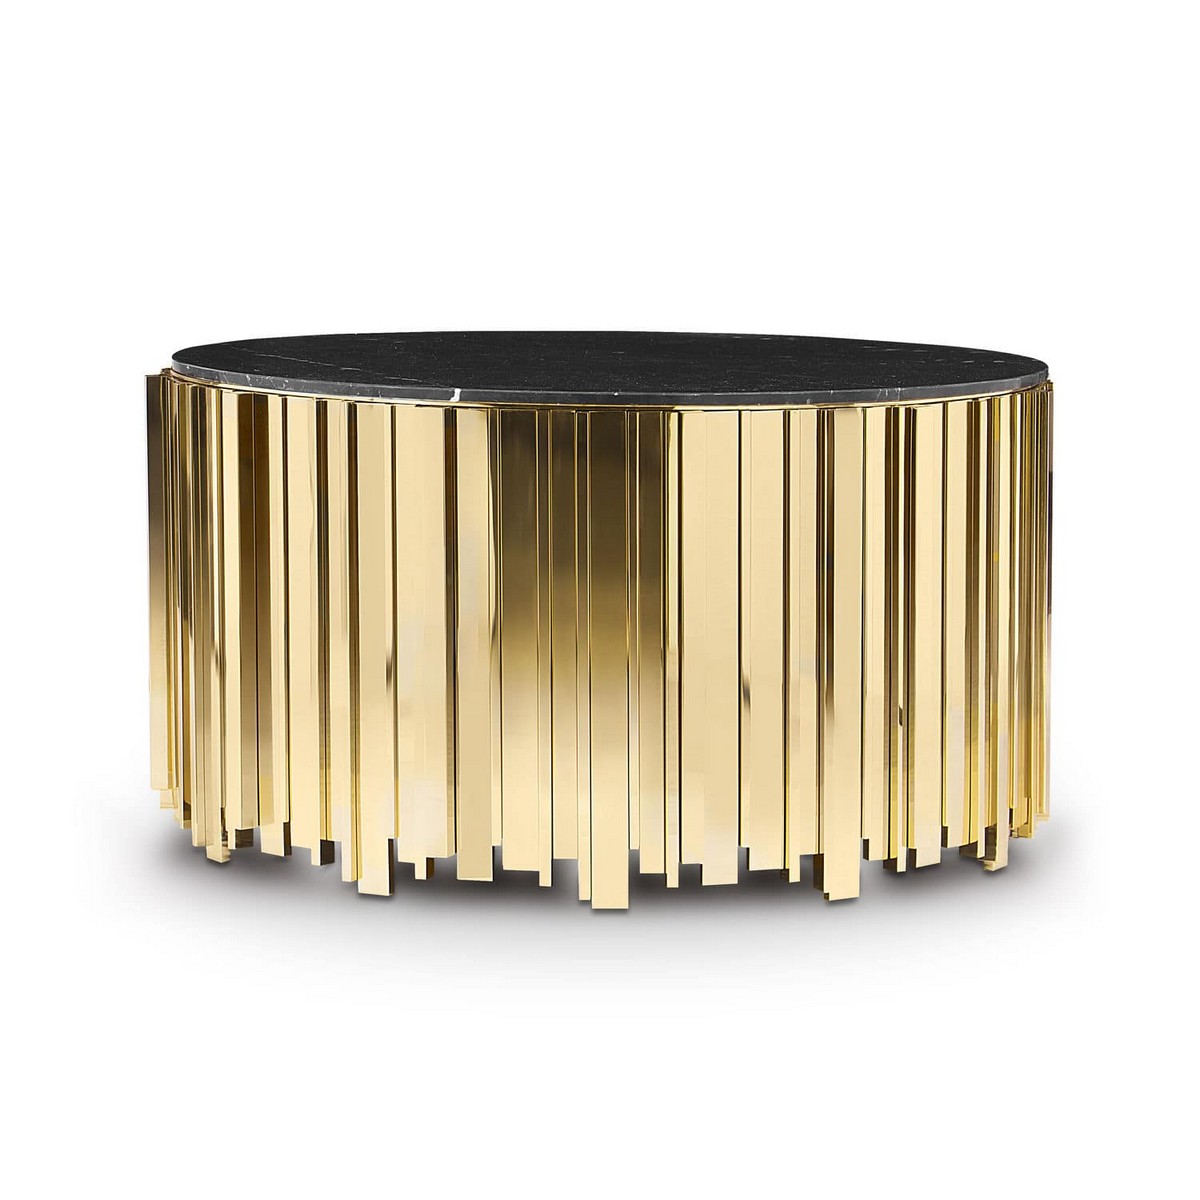 Covet Outlet: New Center Table Entries